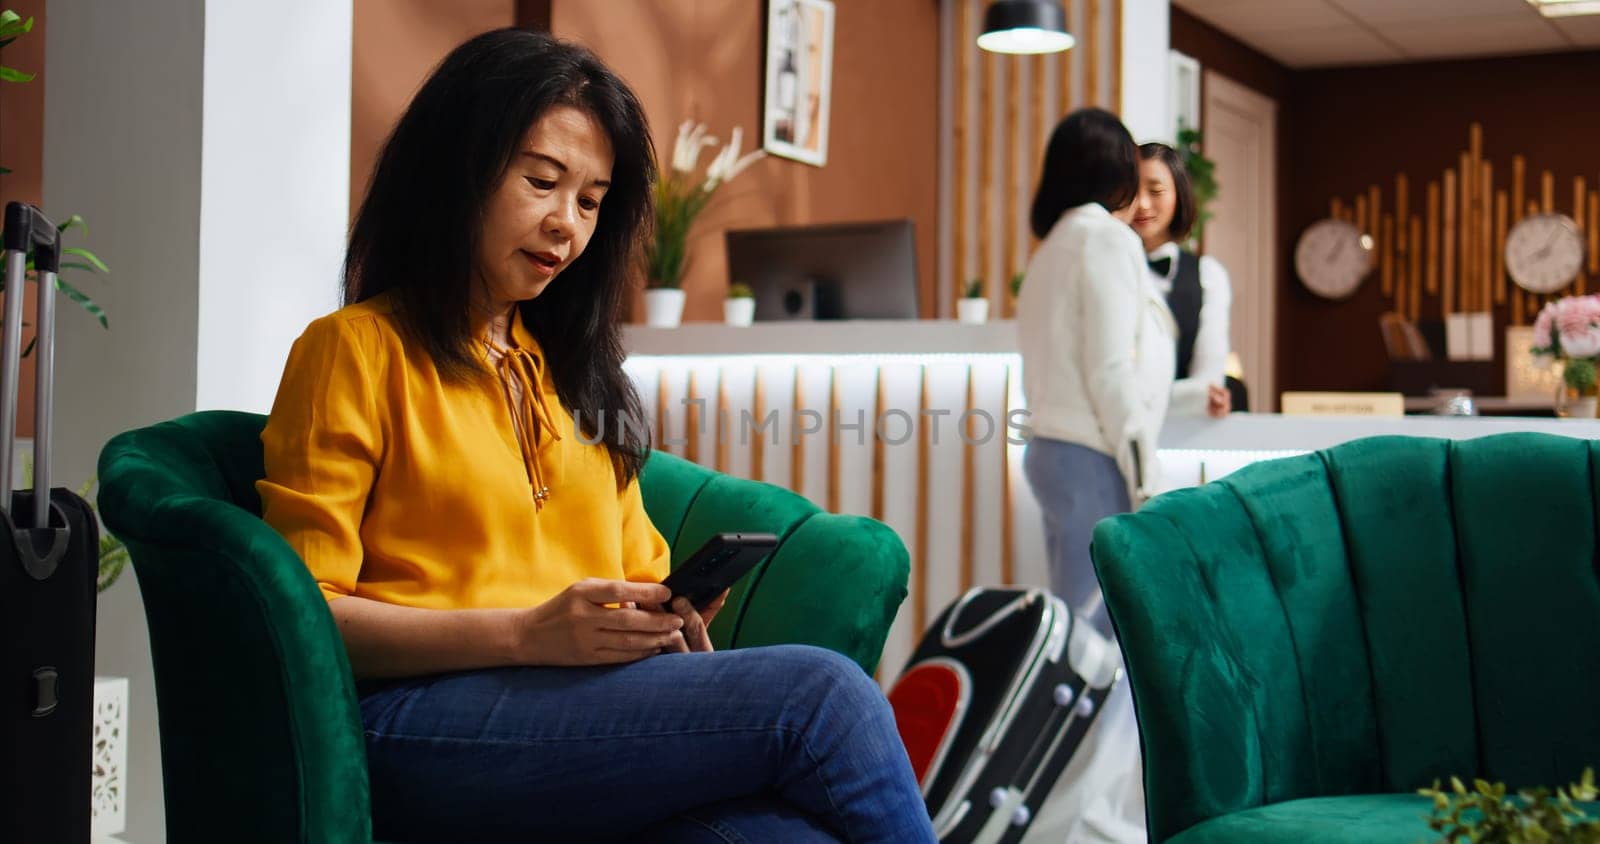 Traveler searching landmarks and places to visit during her stay, using smartphone and relaxing in lounge area at hotel. Asian woman creating a plan for the vacation, waiting to confirm booking.